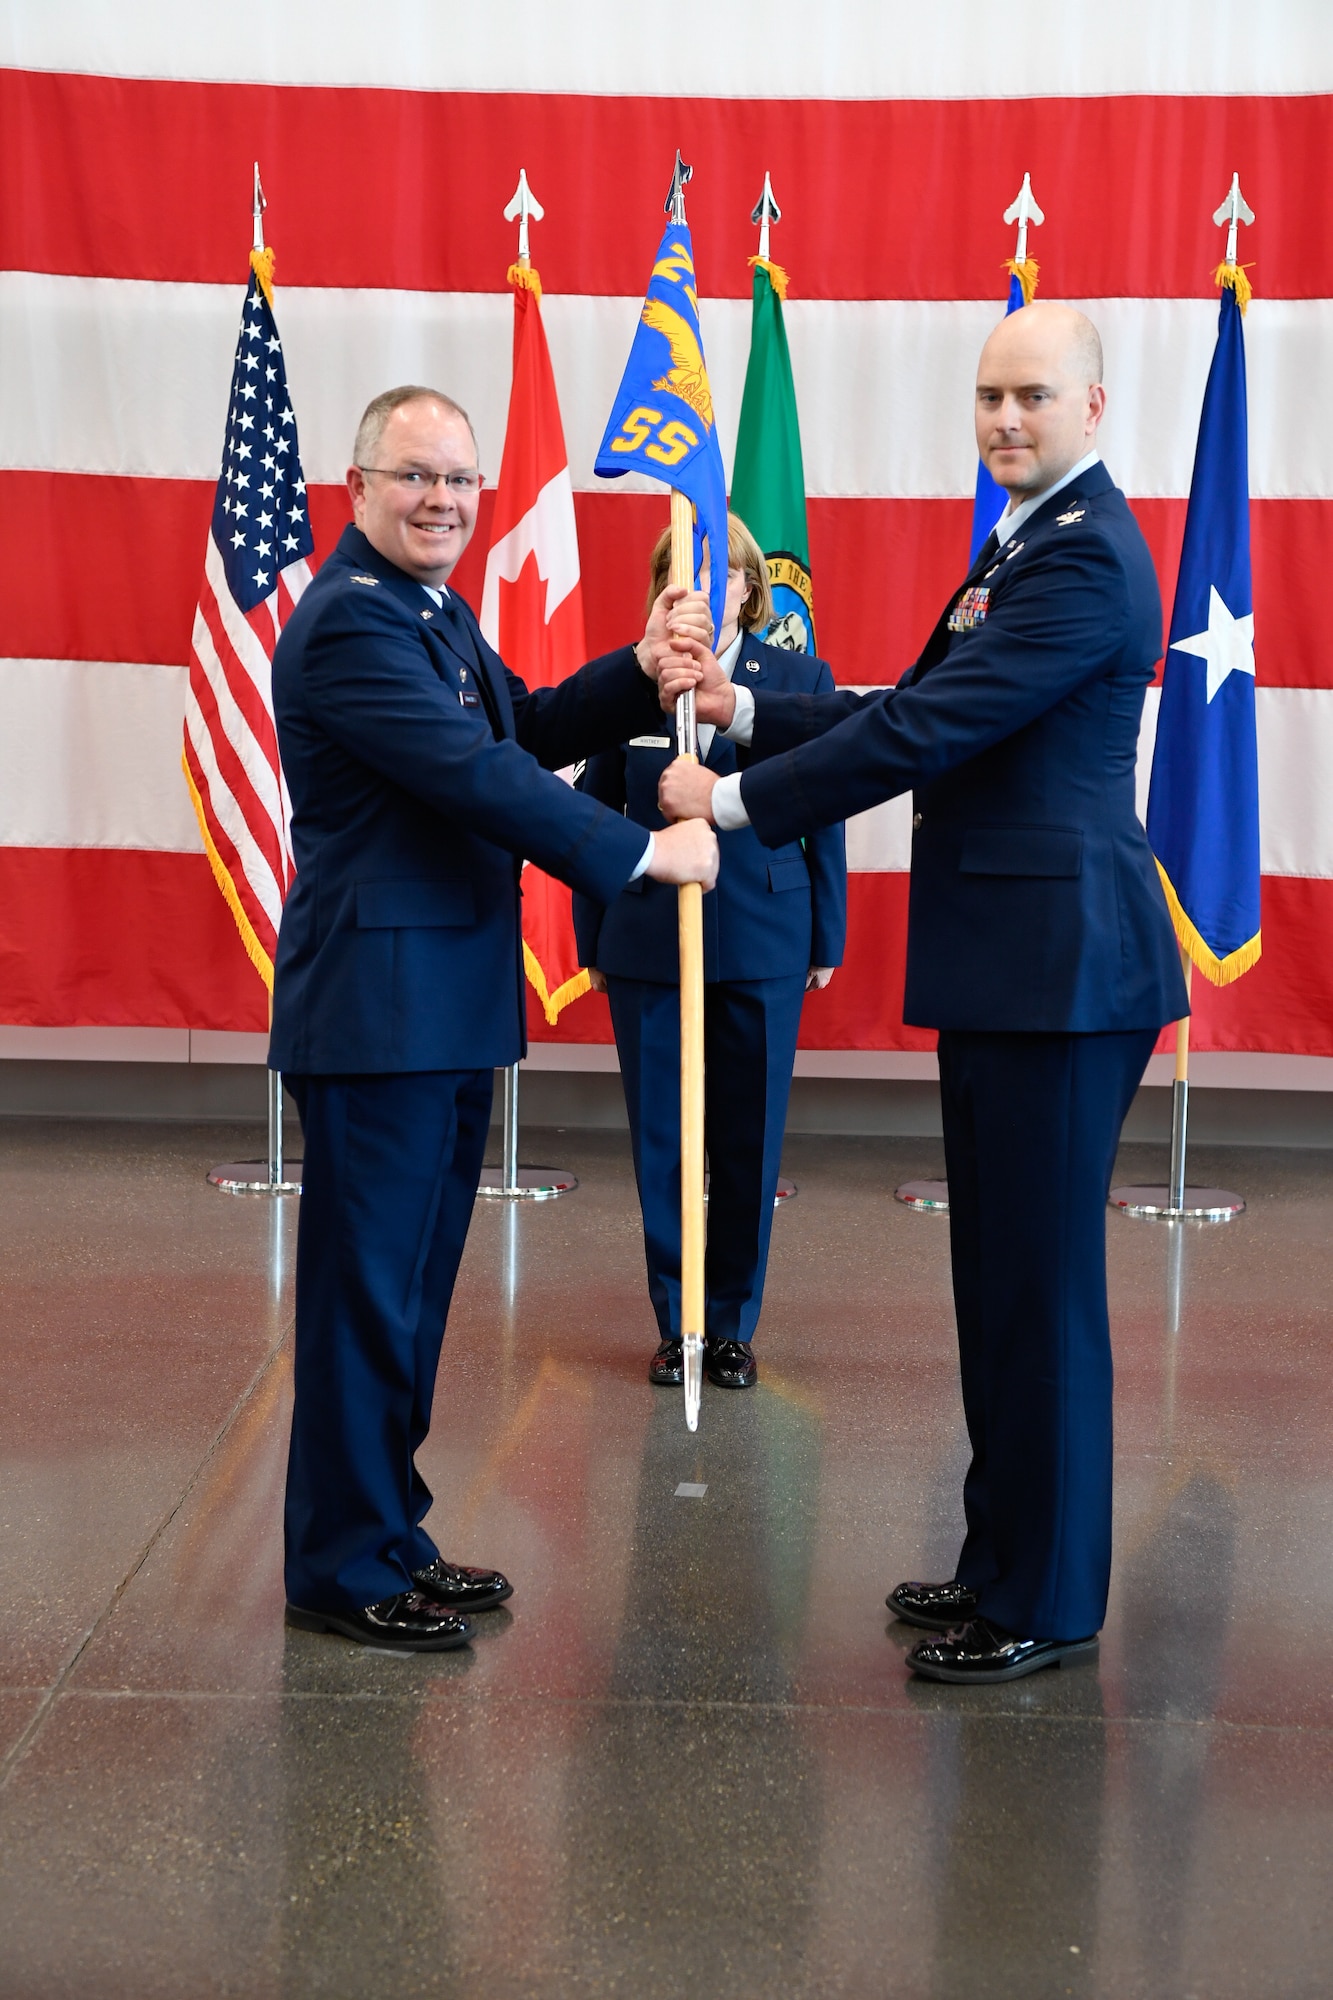 Col. Scott Humphrey presides over the 225th Support Squadron Change of Command where Col. Paige Abbott relinguishes command to Col. Brett Bosselmann at the Pierce County Readiness Center, Camp Murray, Washington, April 10, 2019. (U.S. Air National Guard photo by Capt. Colette Muller)